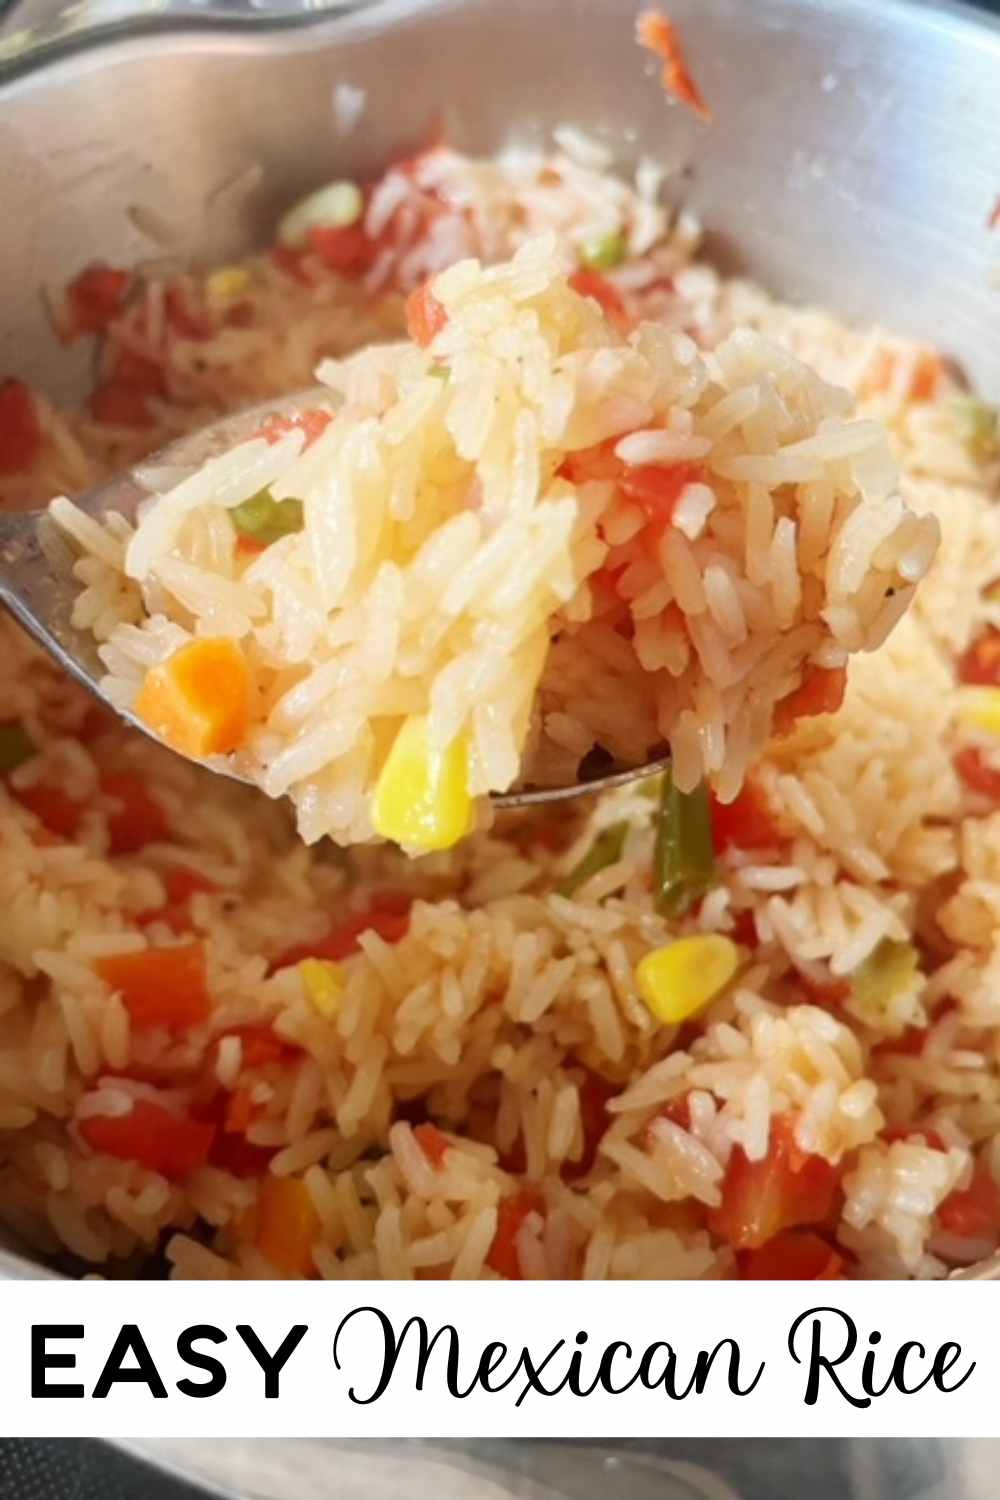 Make this easy Mexican rice during your next taco night! Combine rice with some Rotel, broth, and spices and you've got a great savory side dish.